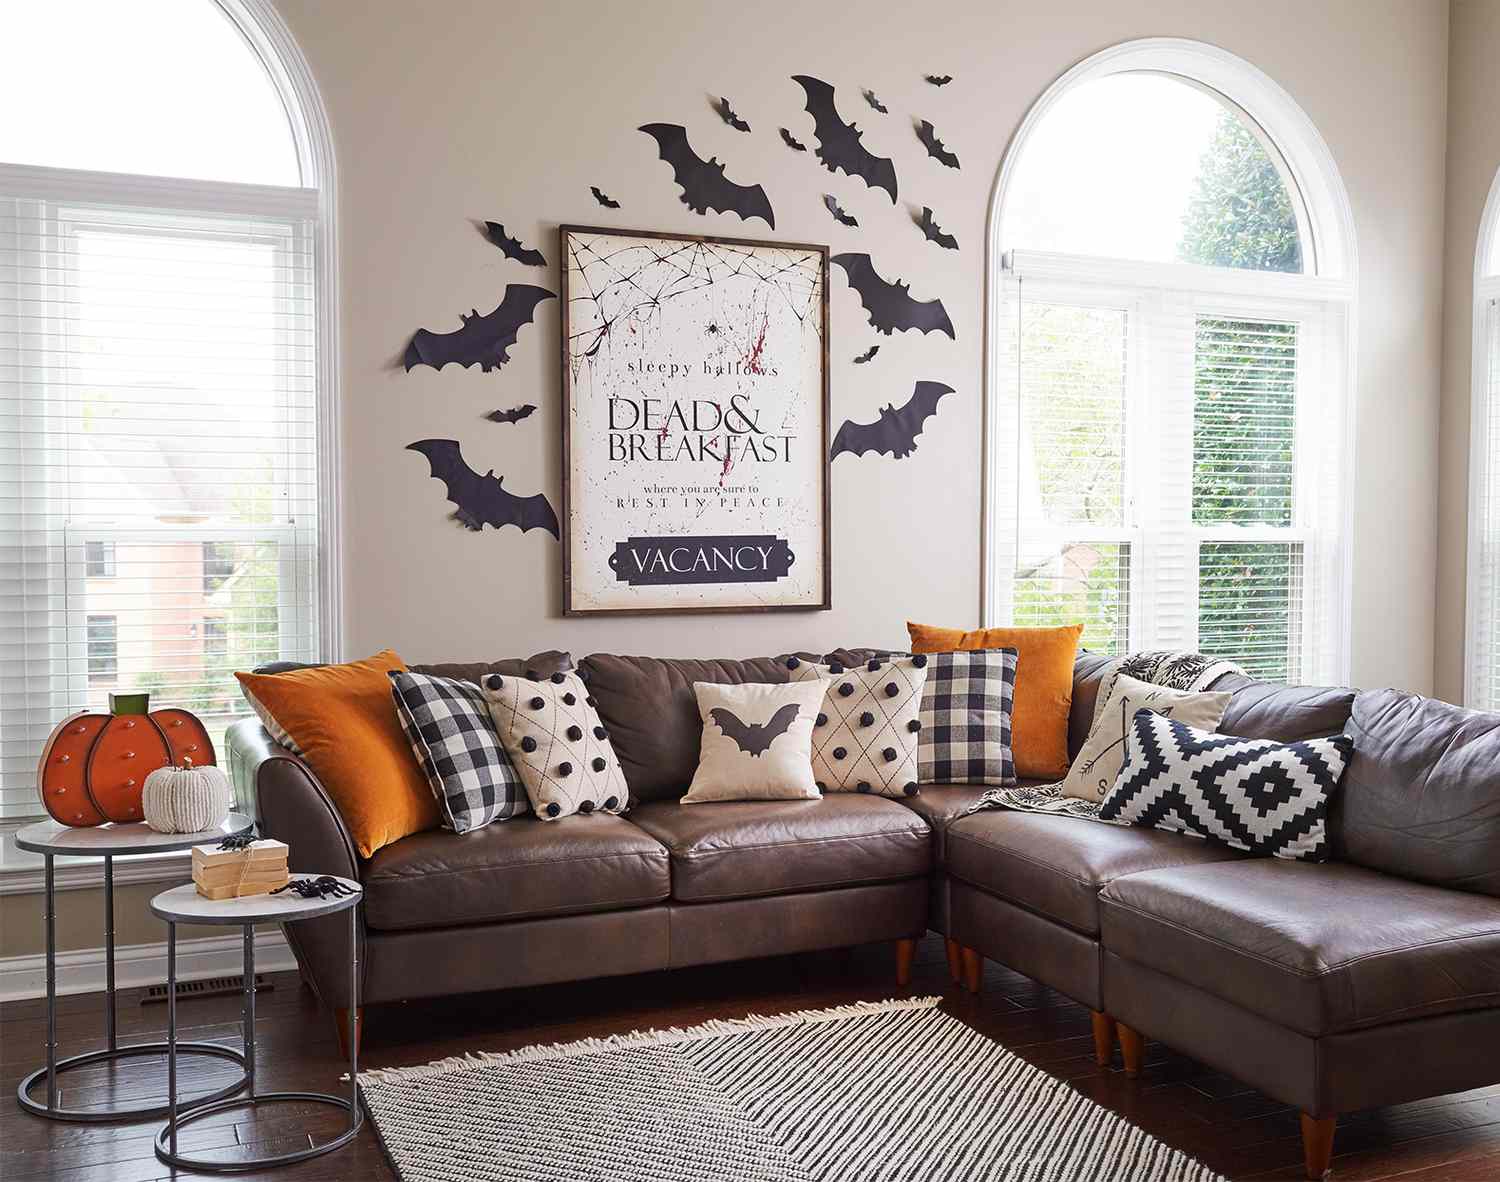 bat wall decor and pillows in living room